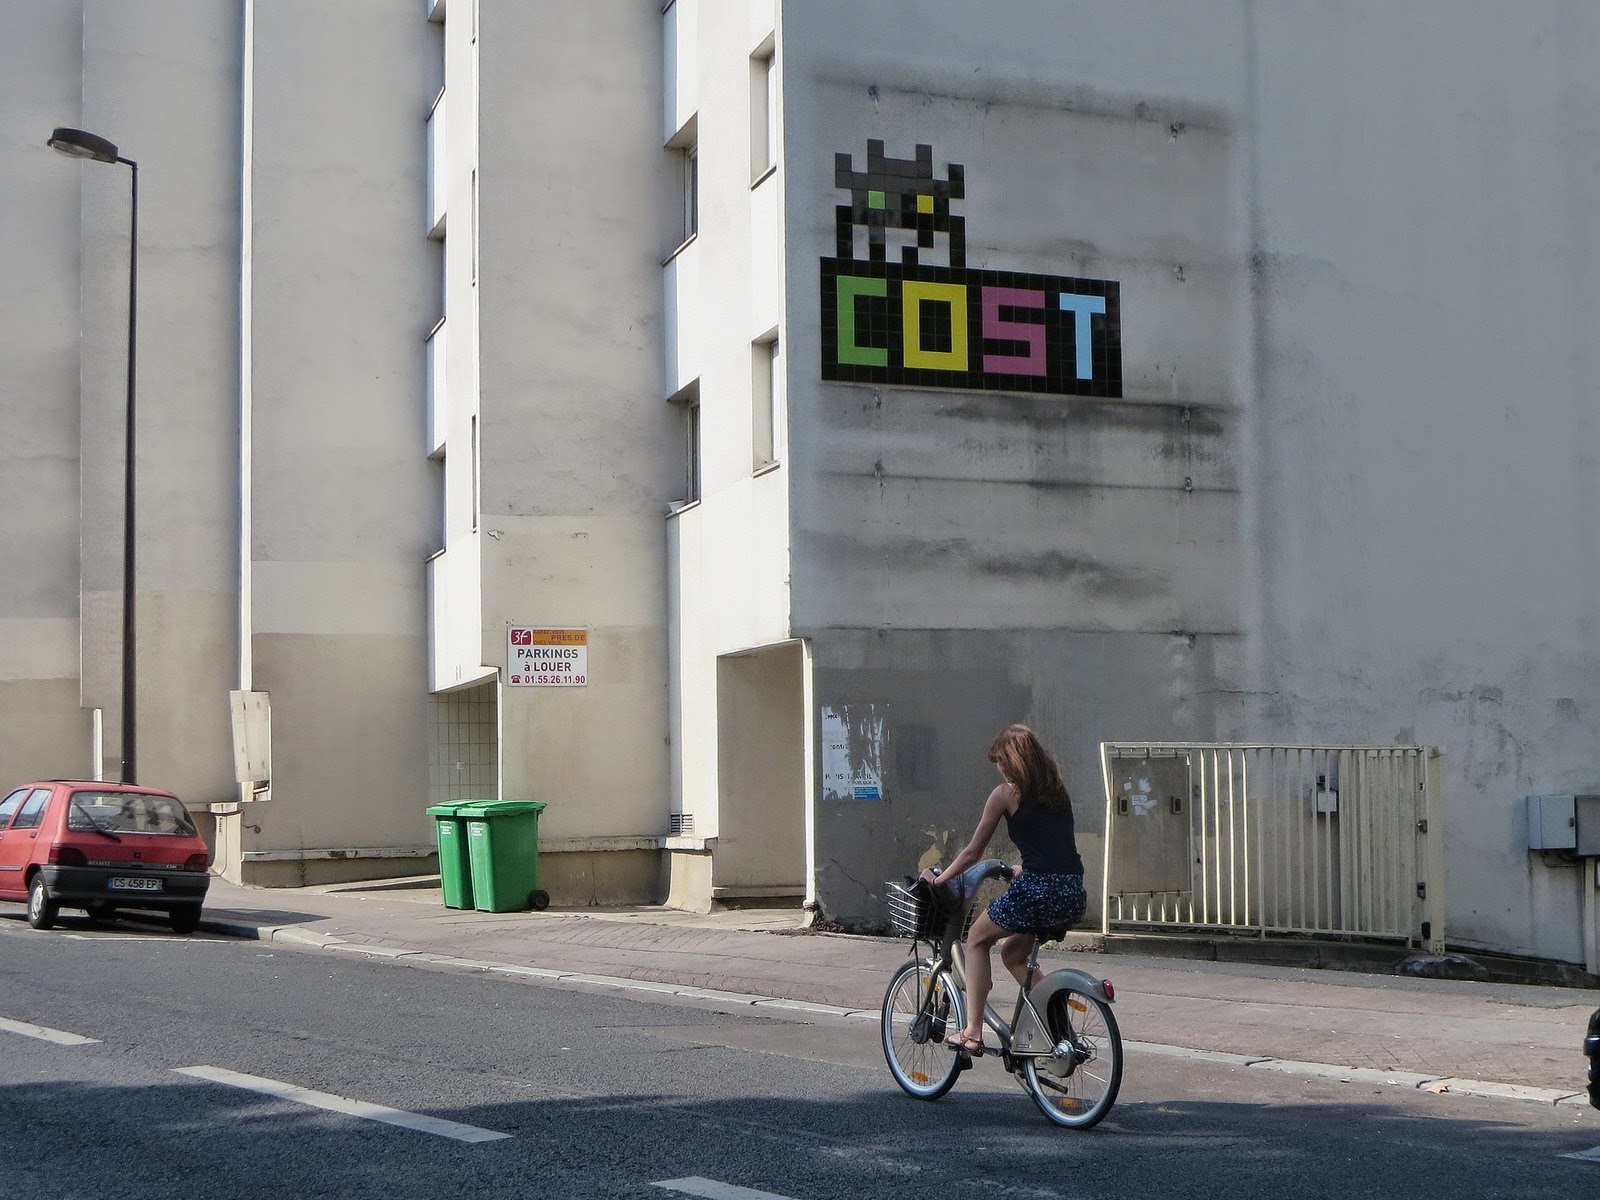 Invader x Cost in Paris, France.